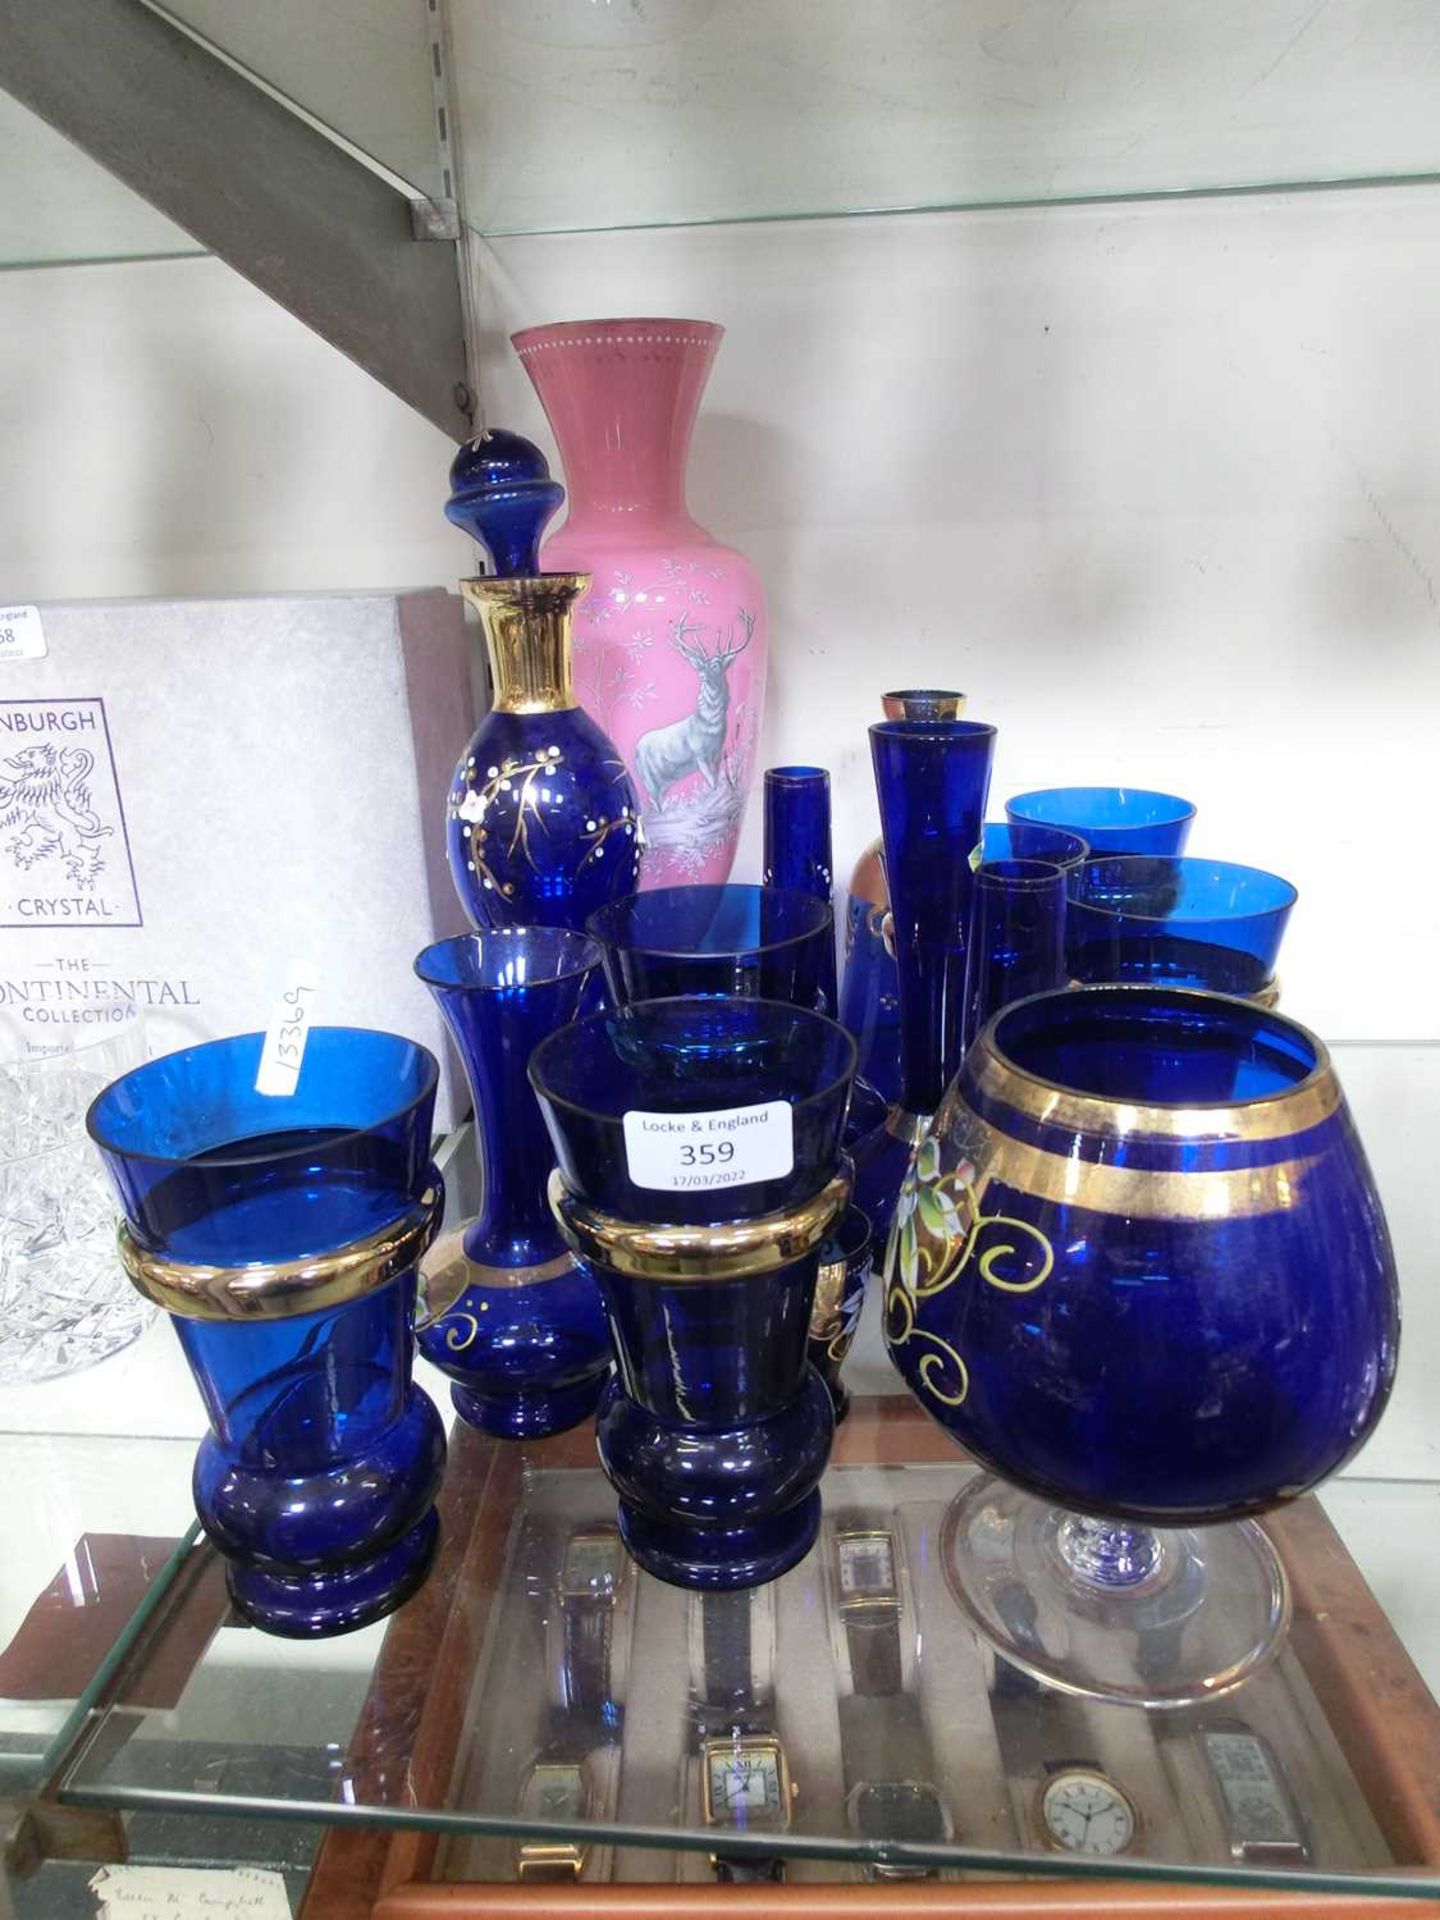 A selection of blue glass with gold rimmed edging together with a pink glass vase with stag design